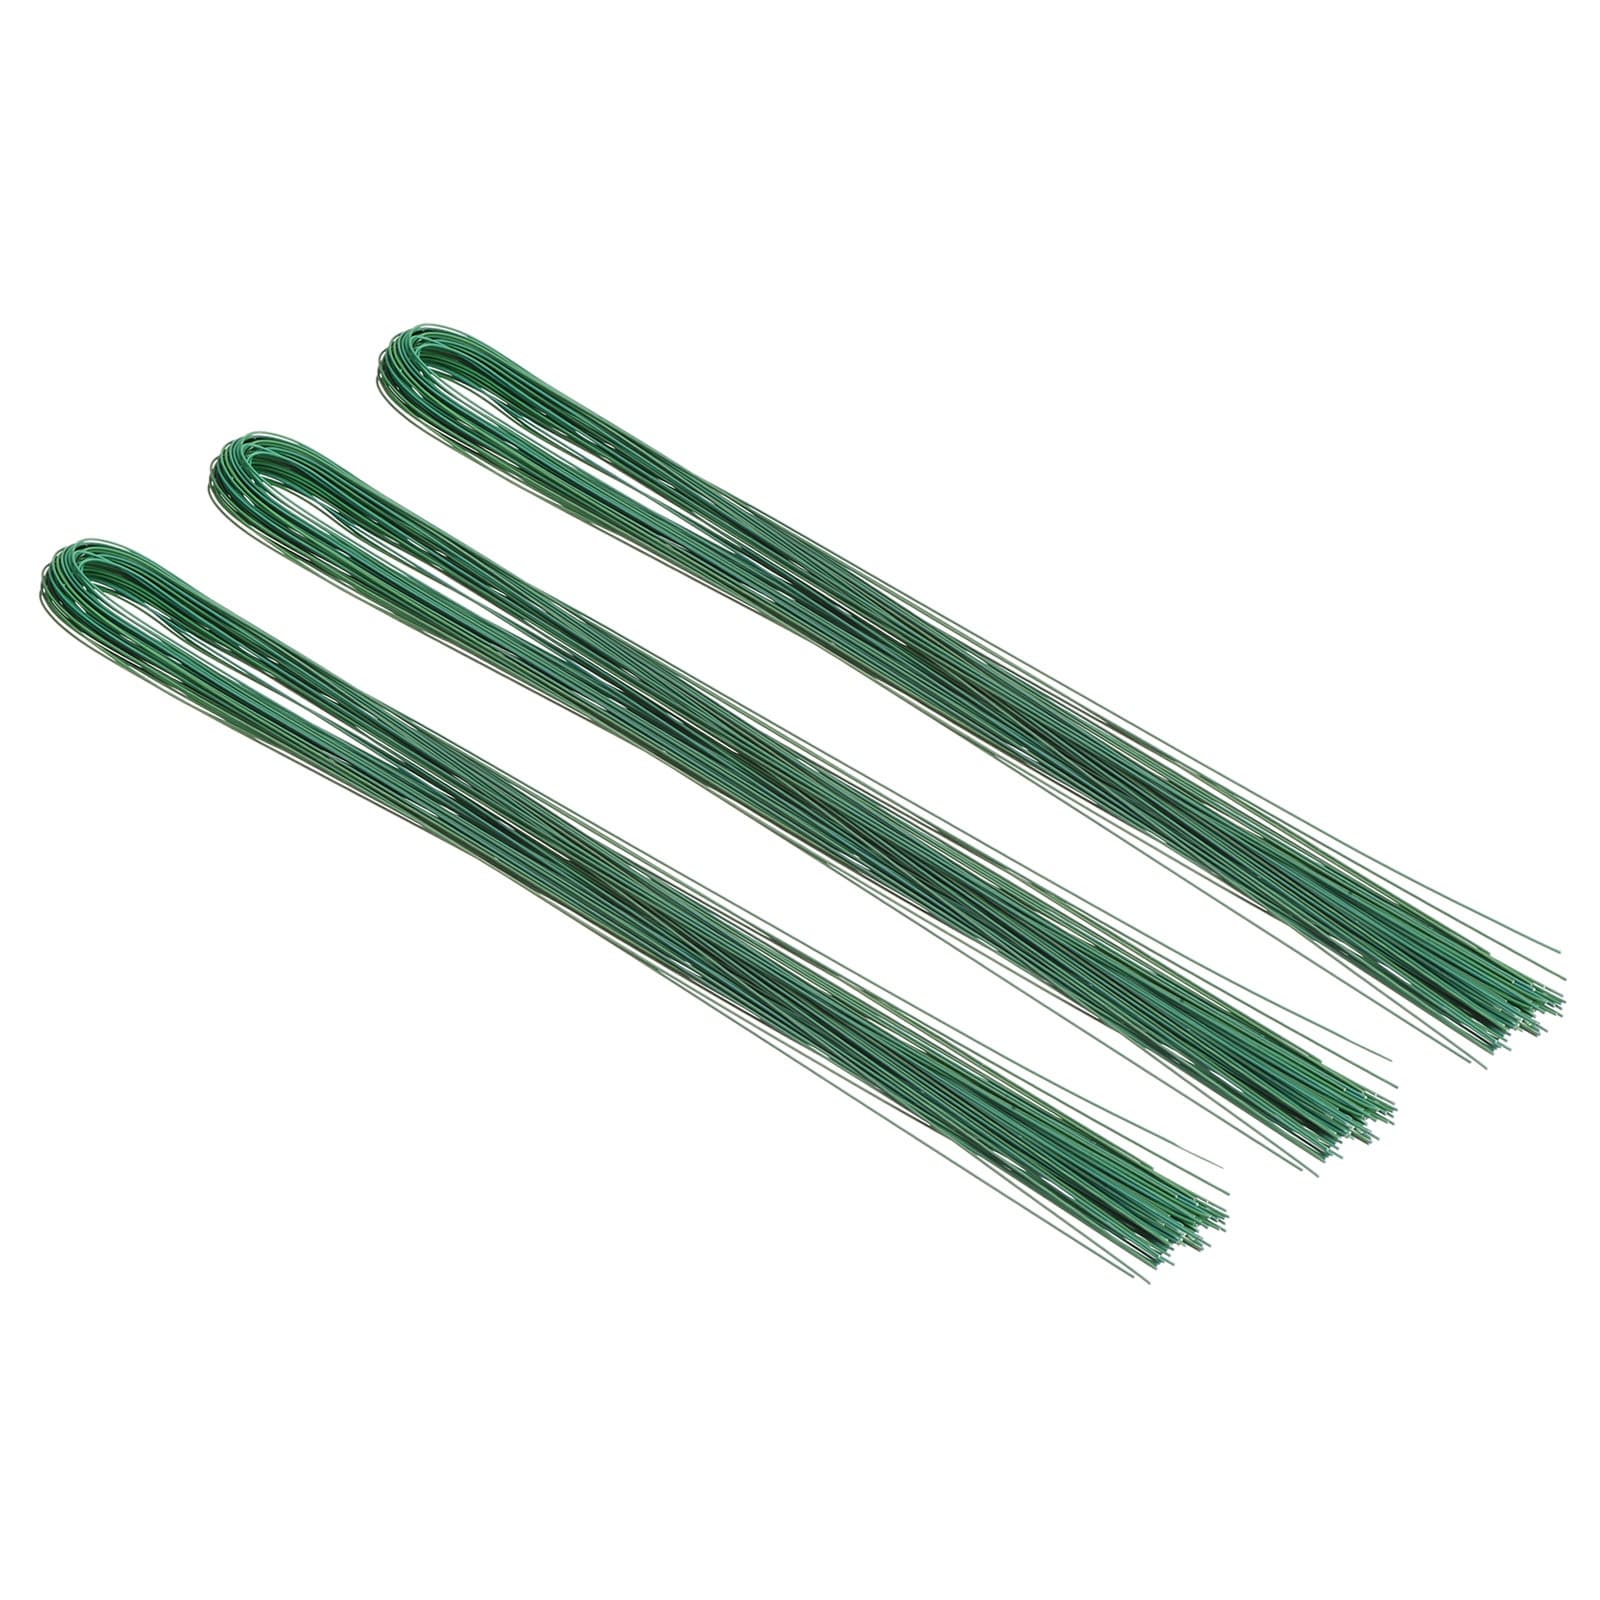 3 Pack/120 Pcs 32 in 22 Gauge Floral Stem Wire Bouquet Stem Wrapped Green